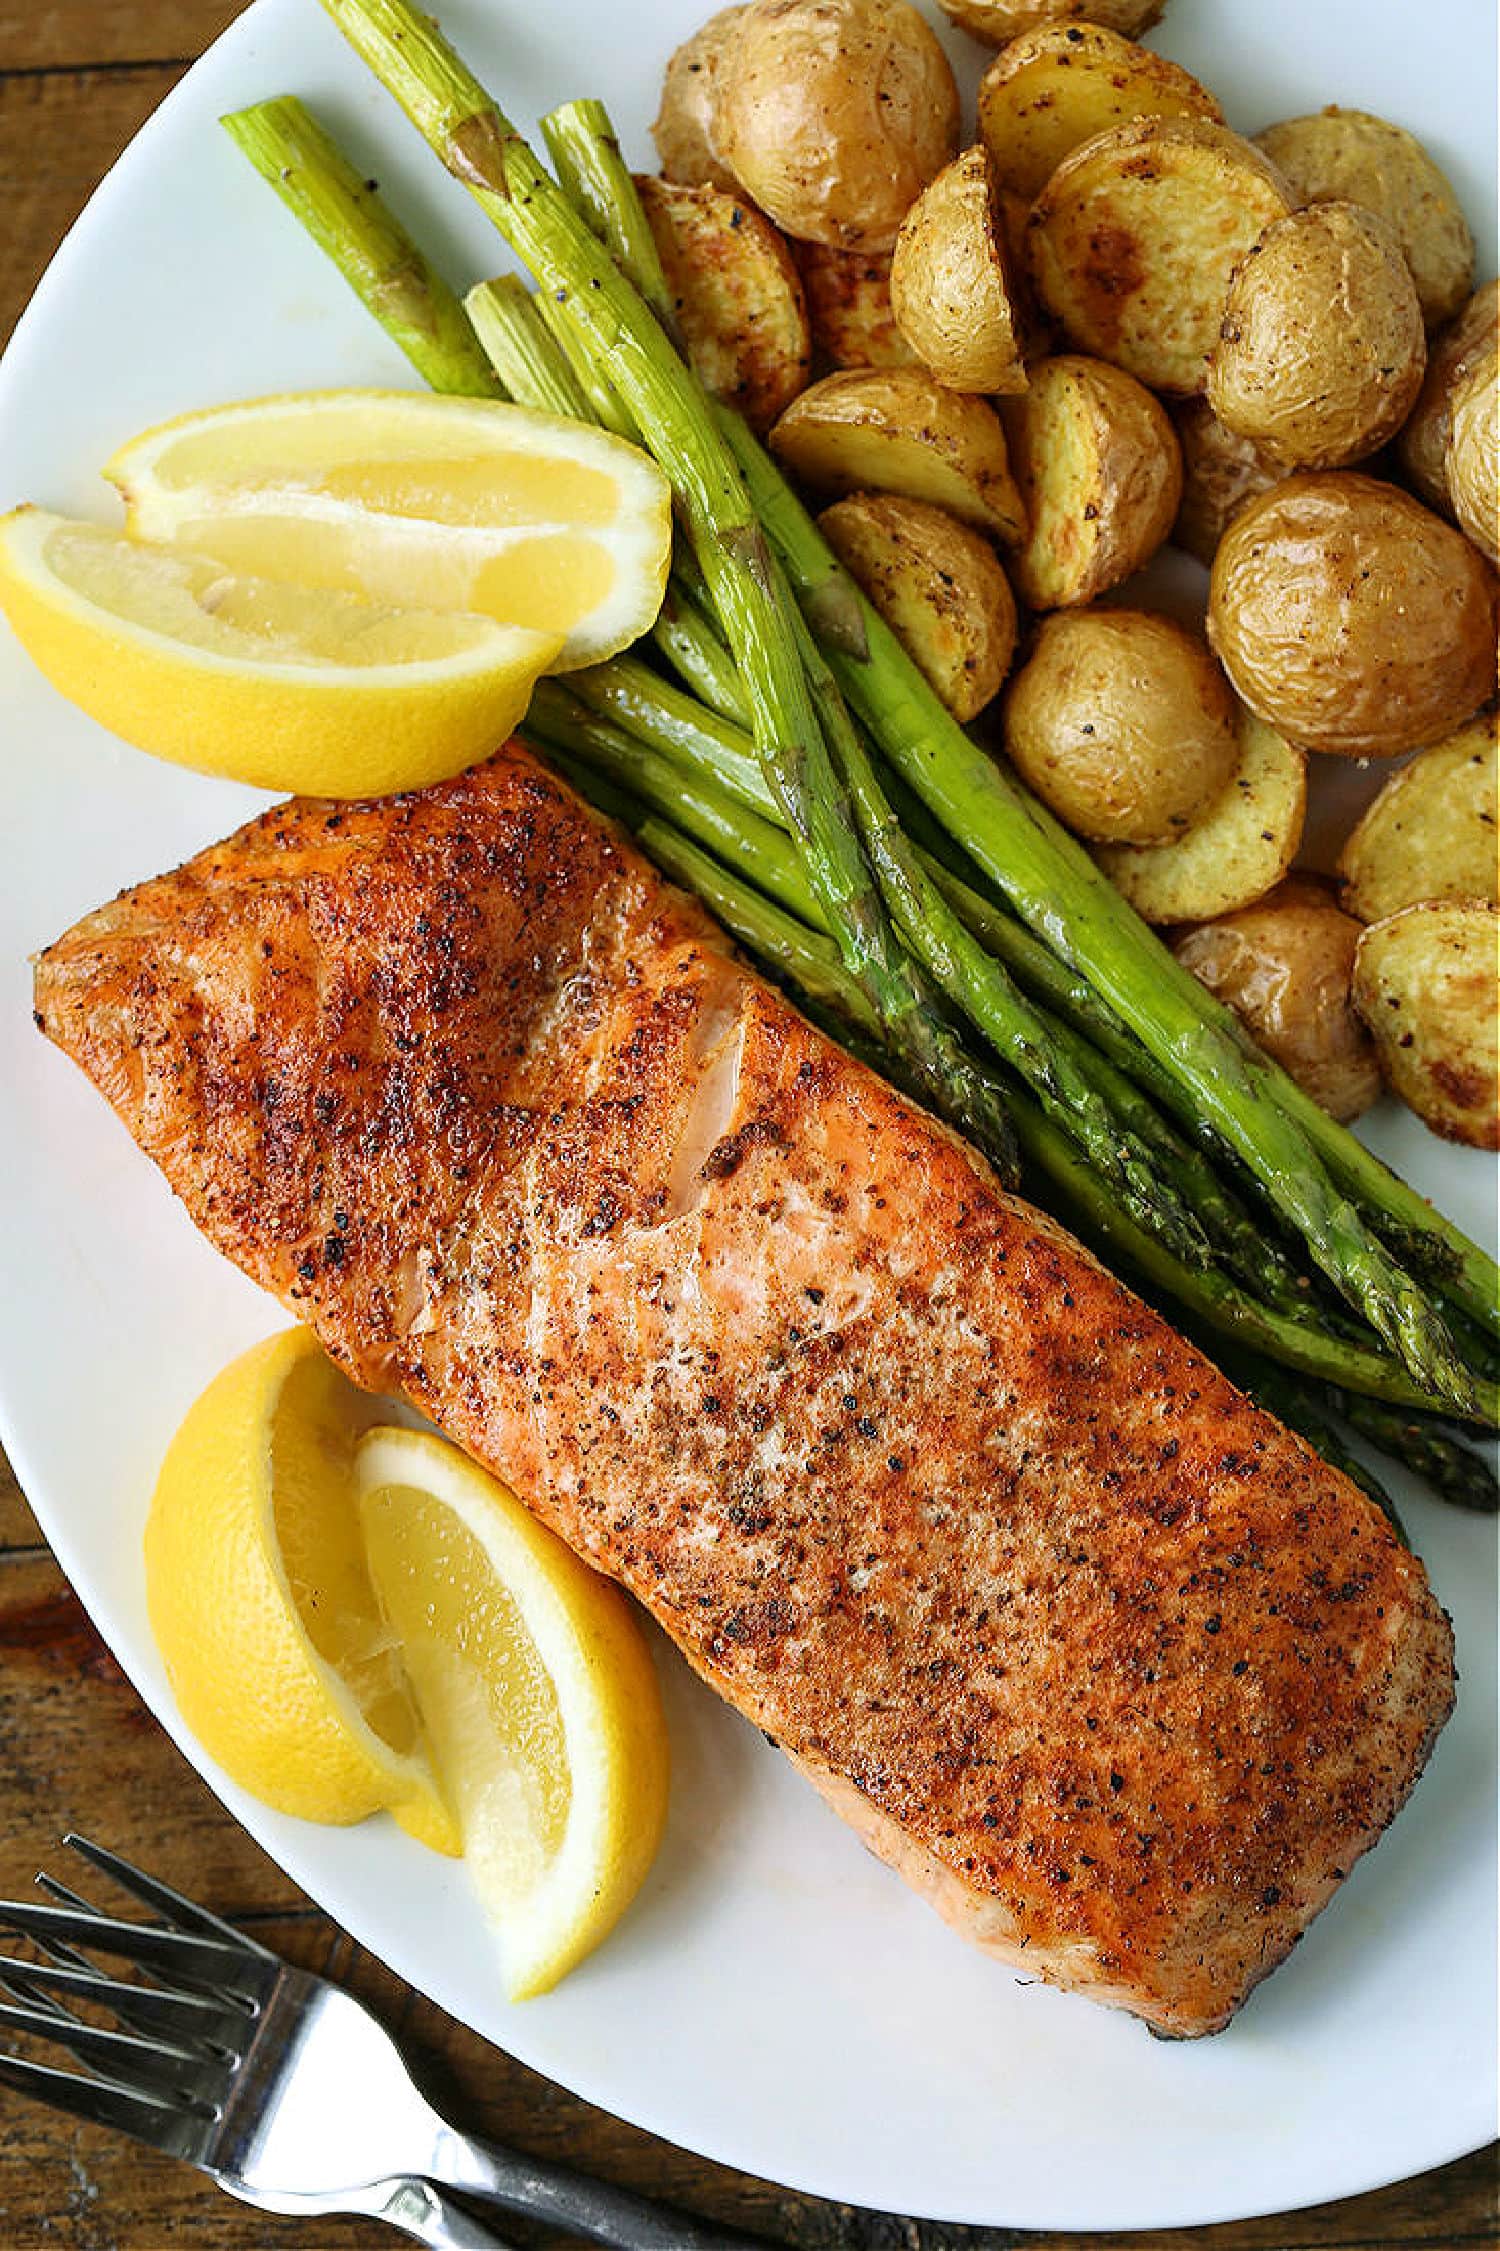 grilled salmon on plate with vegetables and lemons